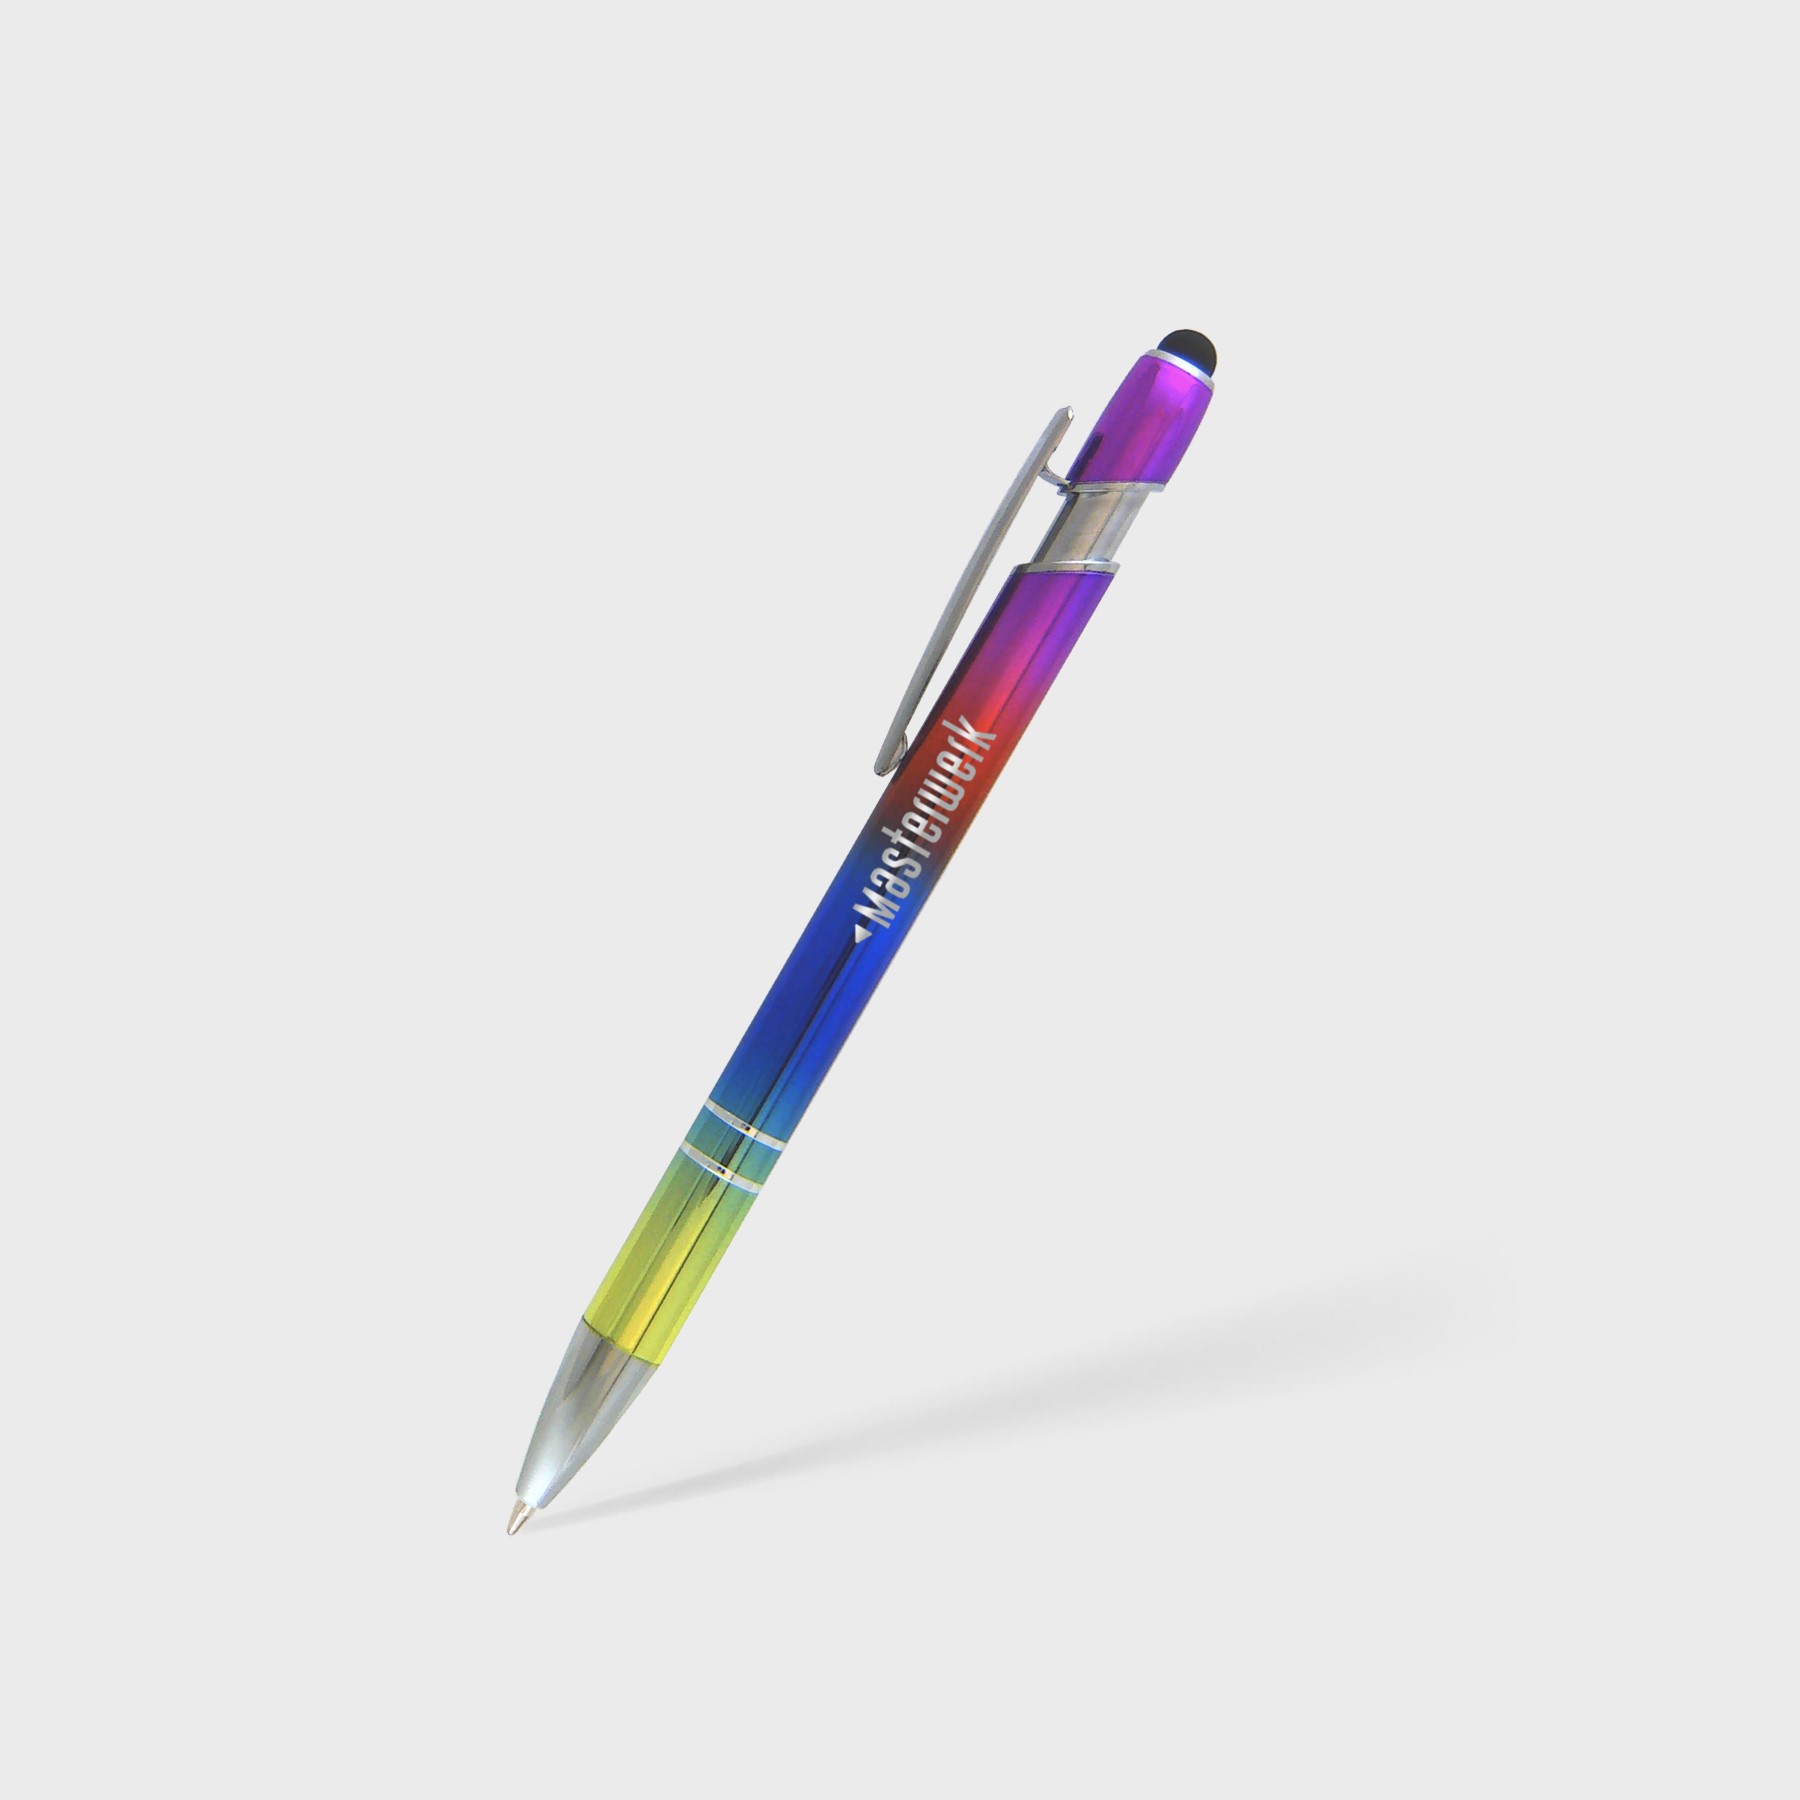 Look for Awesome Pen — HUB